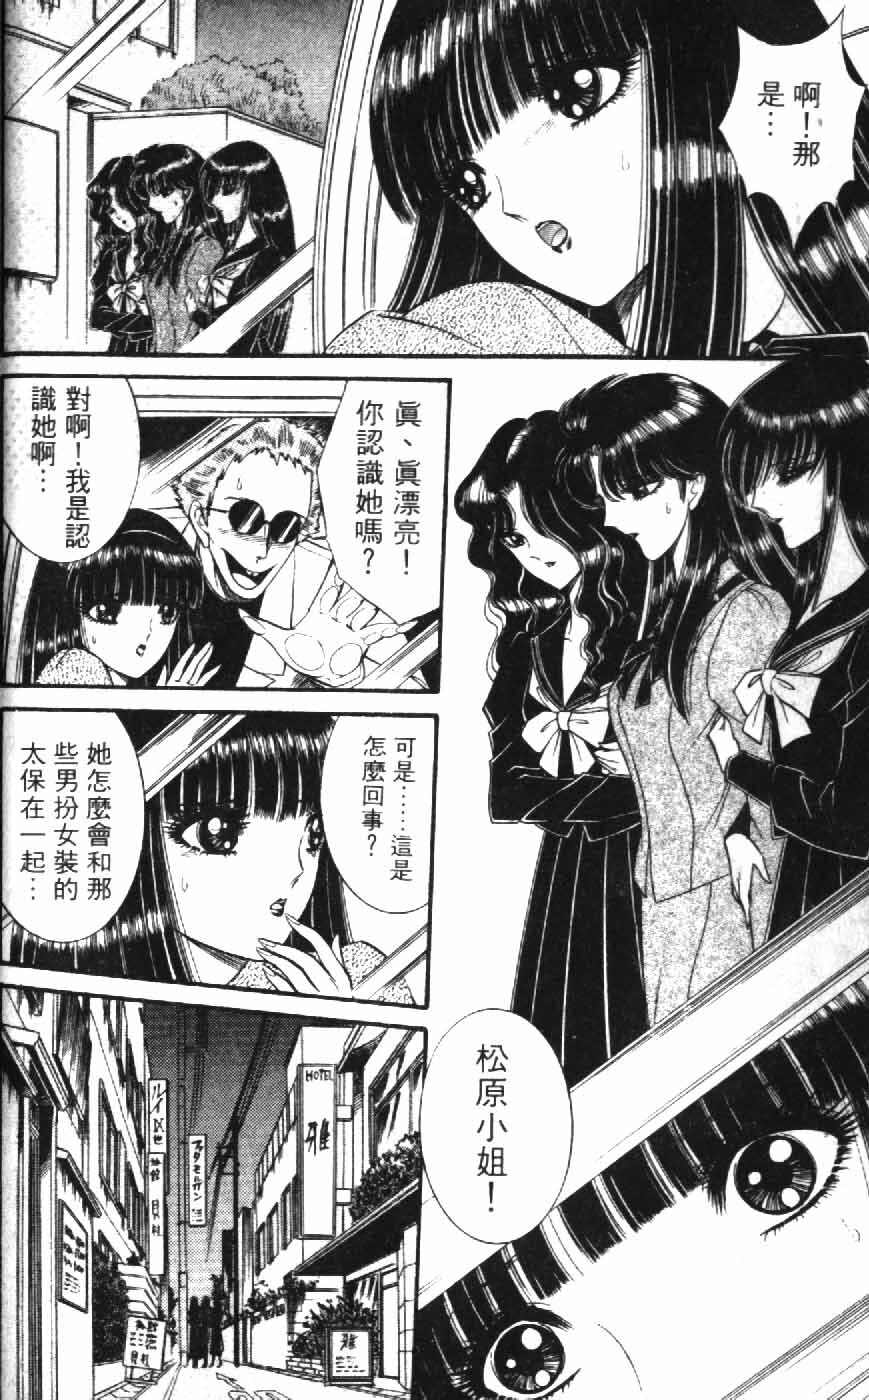 [Senno Knife] Ouma ga Horror Show 1 - Trans Sexual Special Show 1 | 顫慄博覽會 1 [Chinese] page 30 full